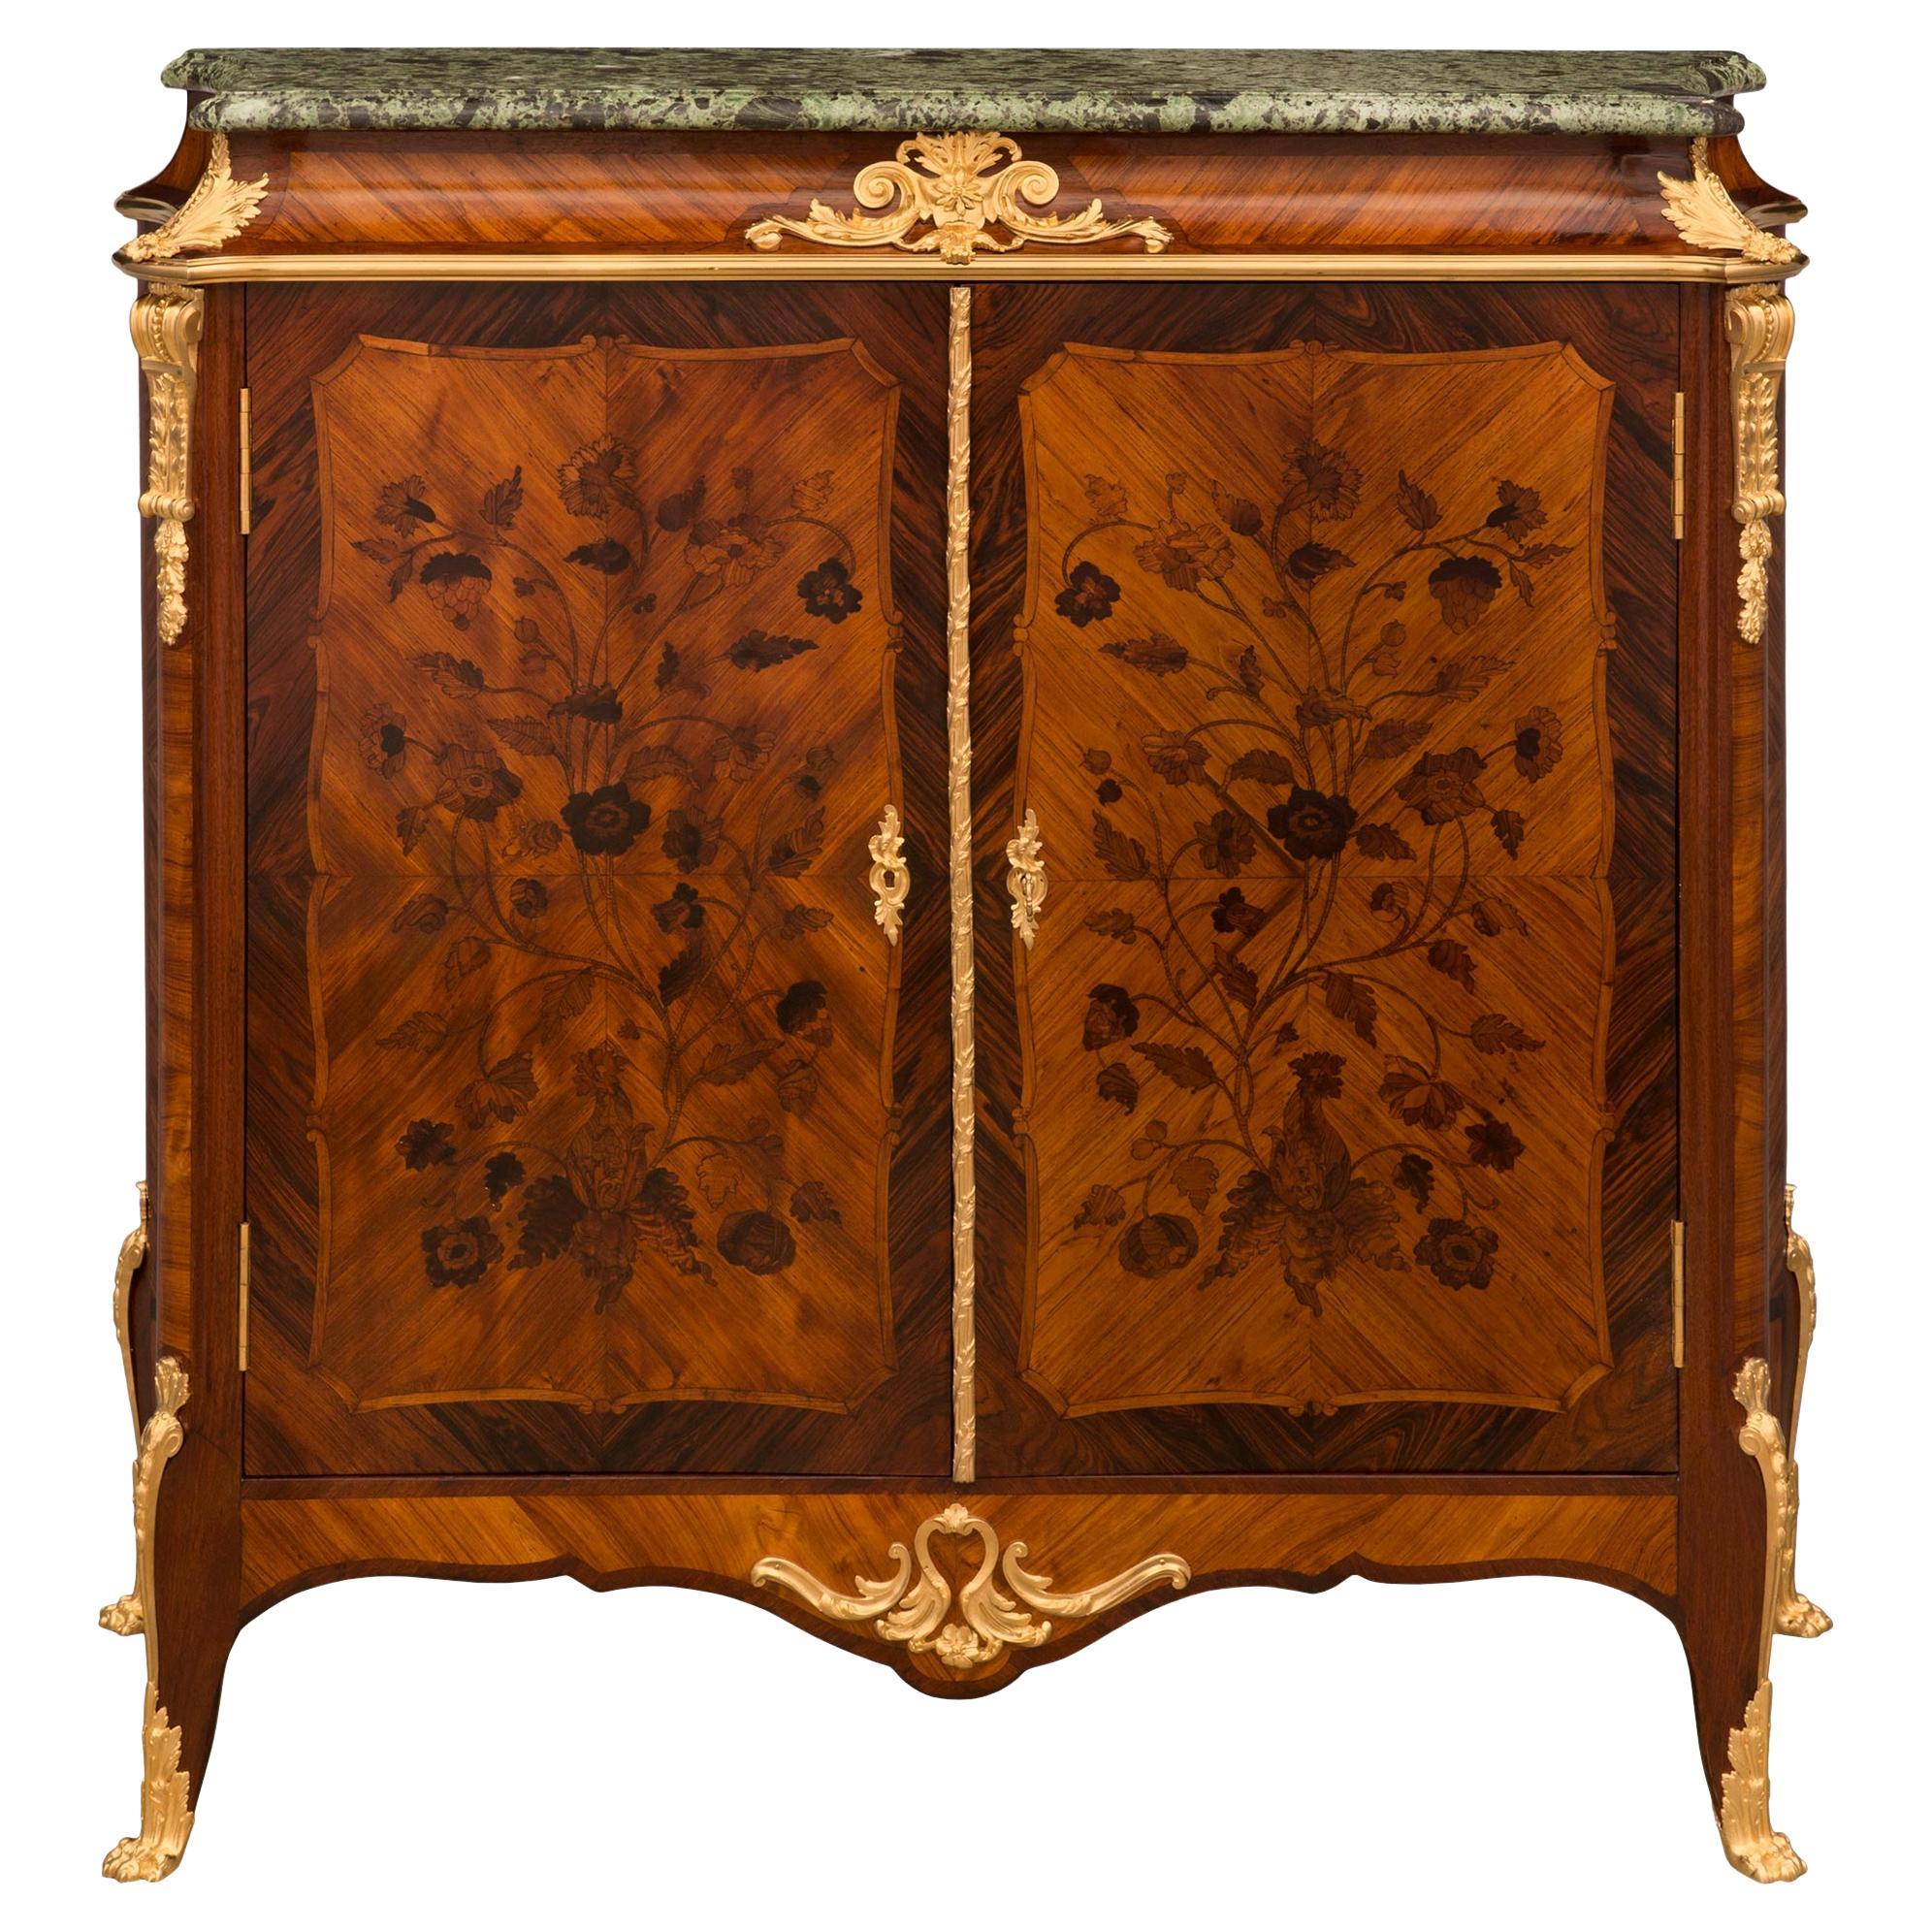 French 19th Century Transitional St. Belle Époque Period Cabinet For Sale